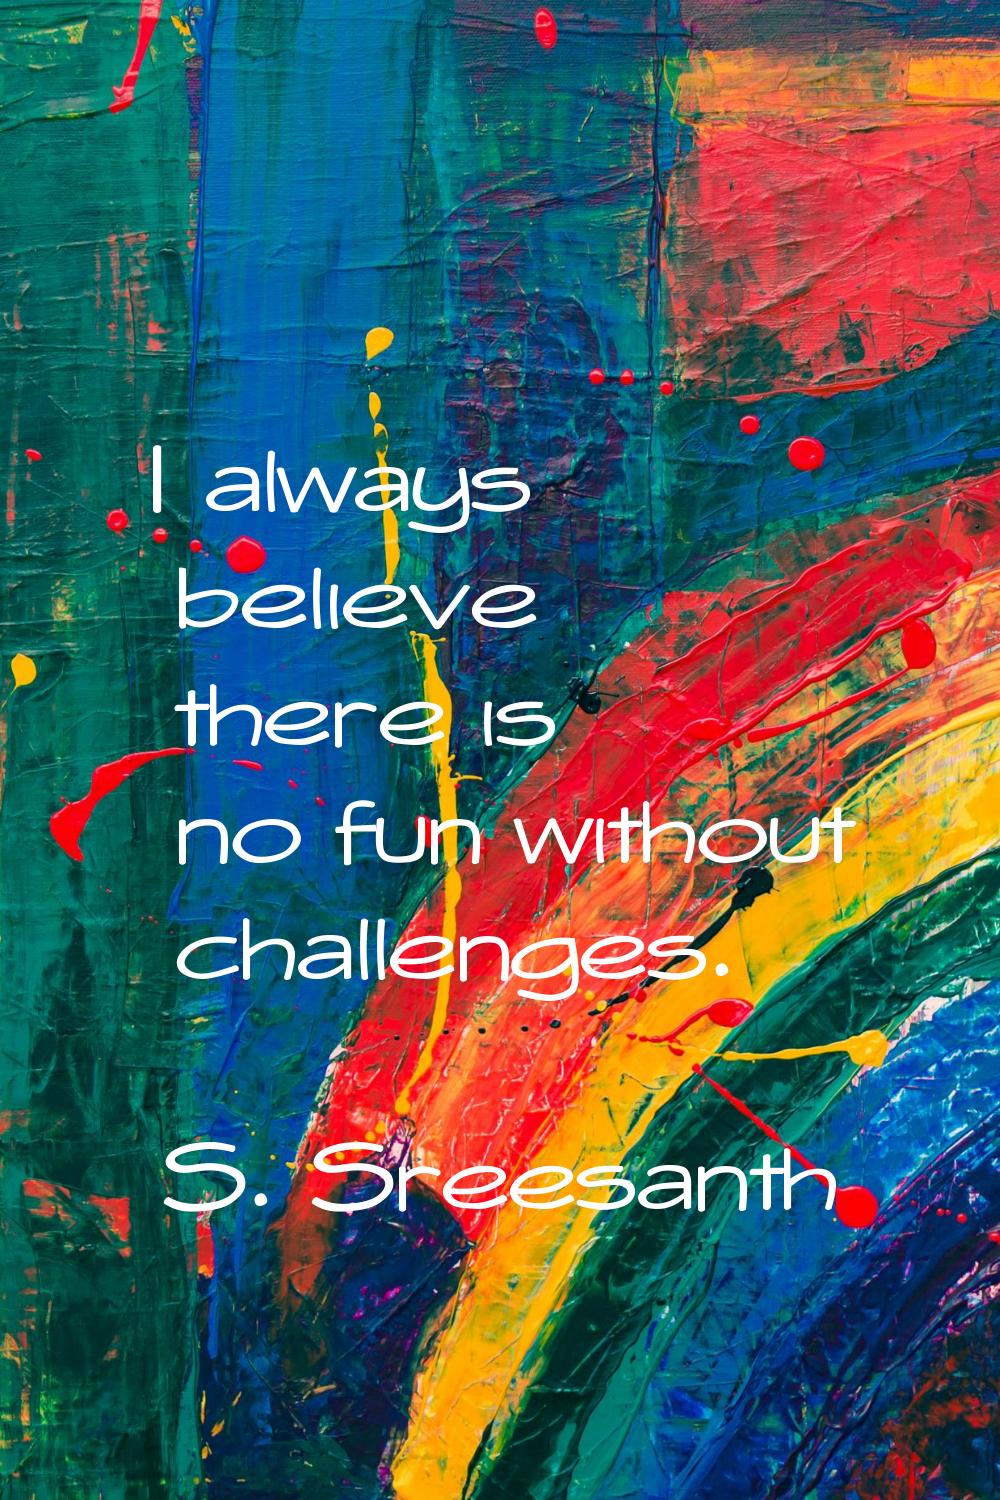 I always believe there is no fun without challenges.